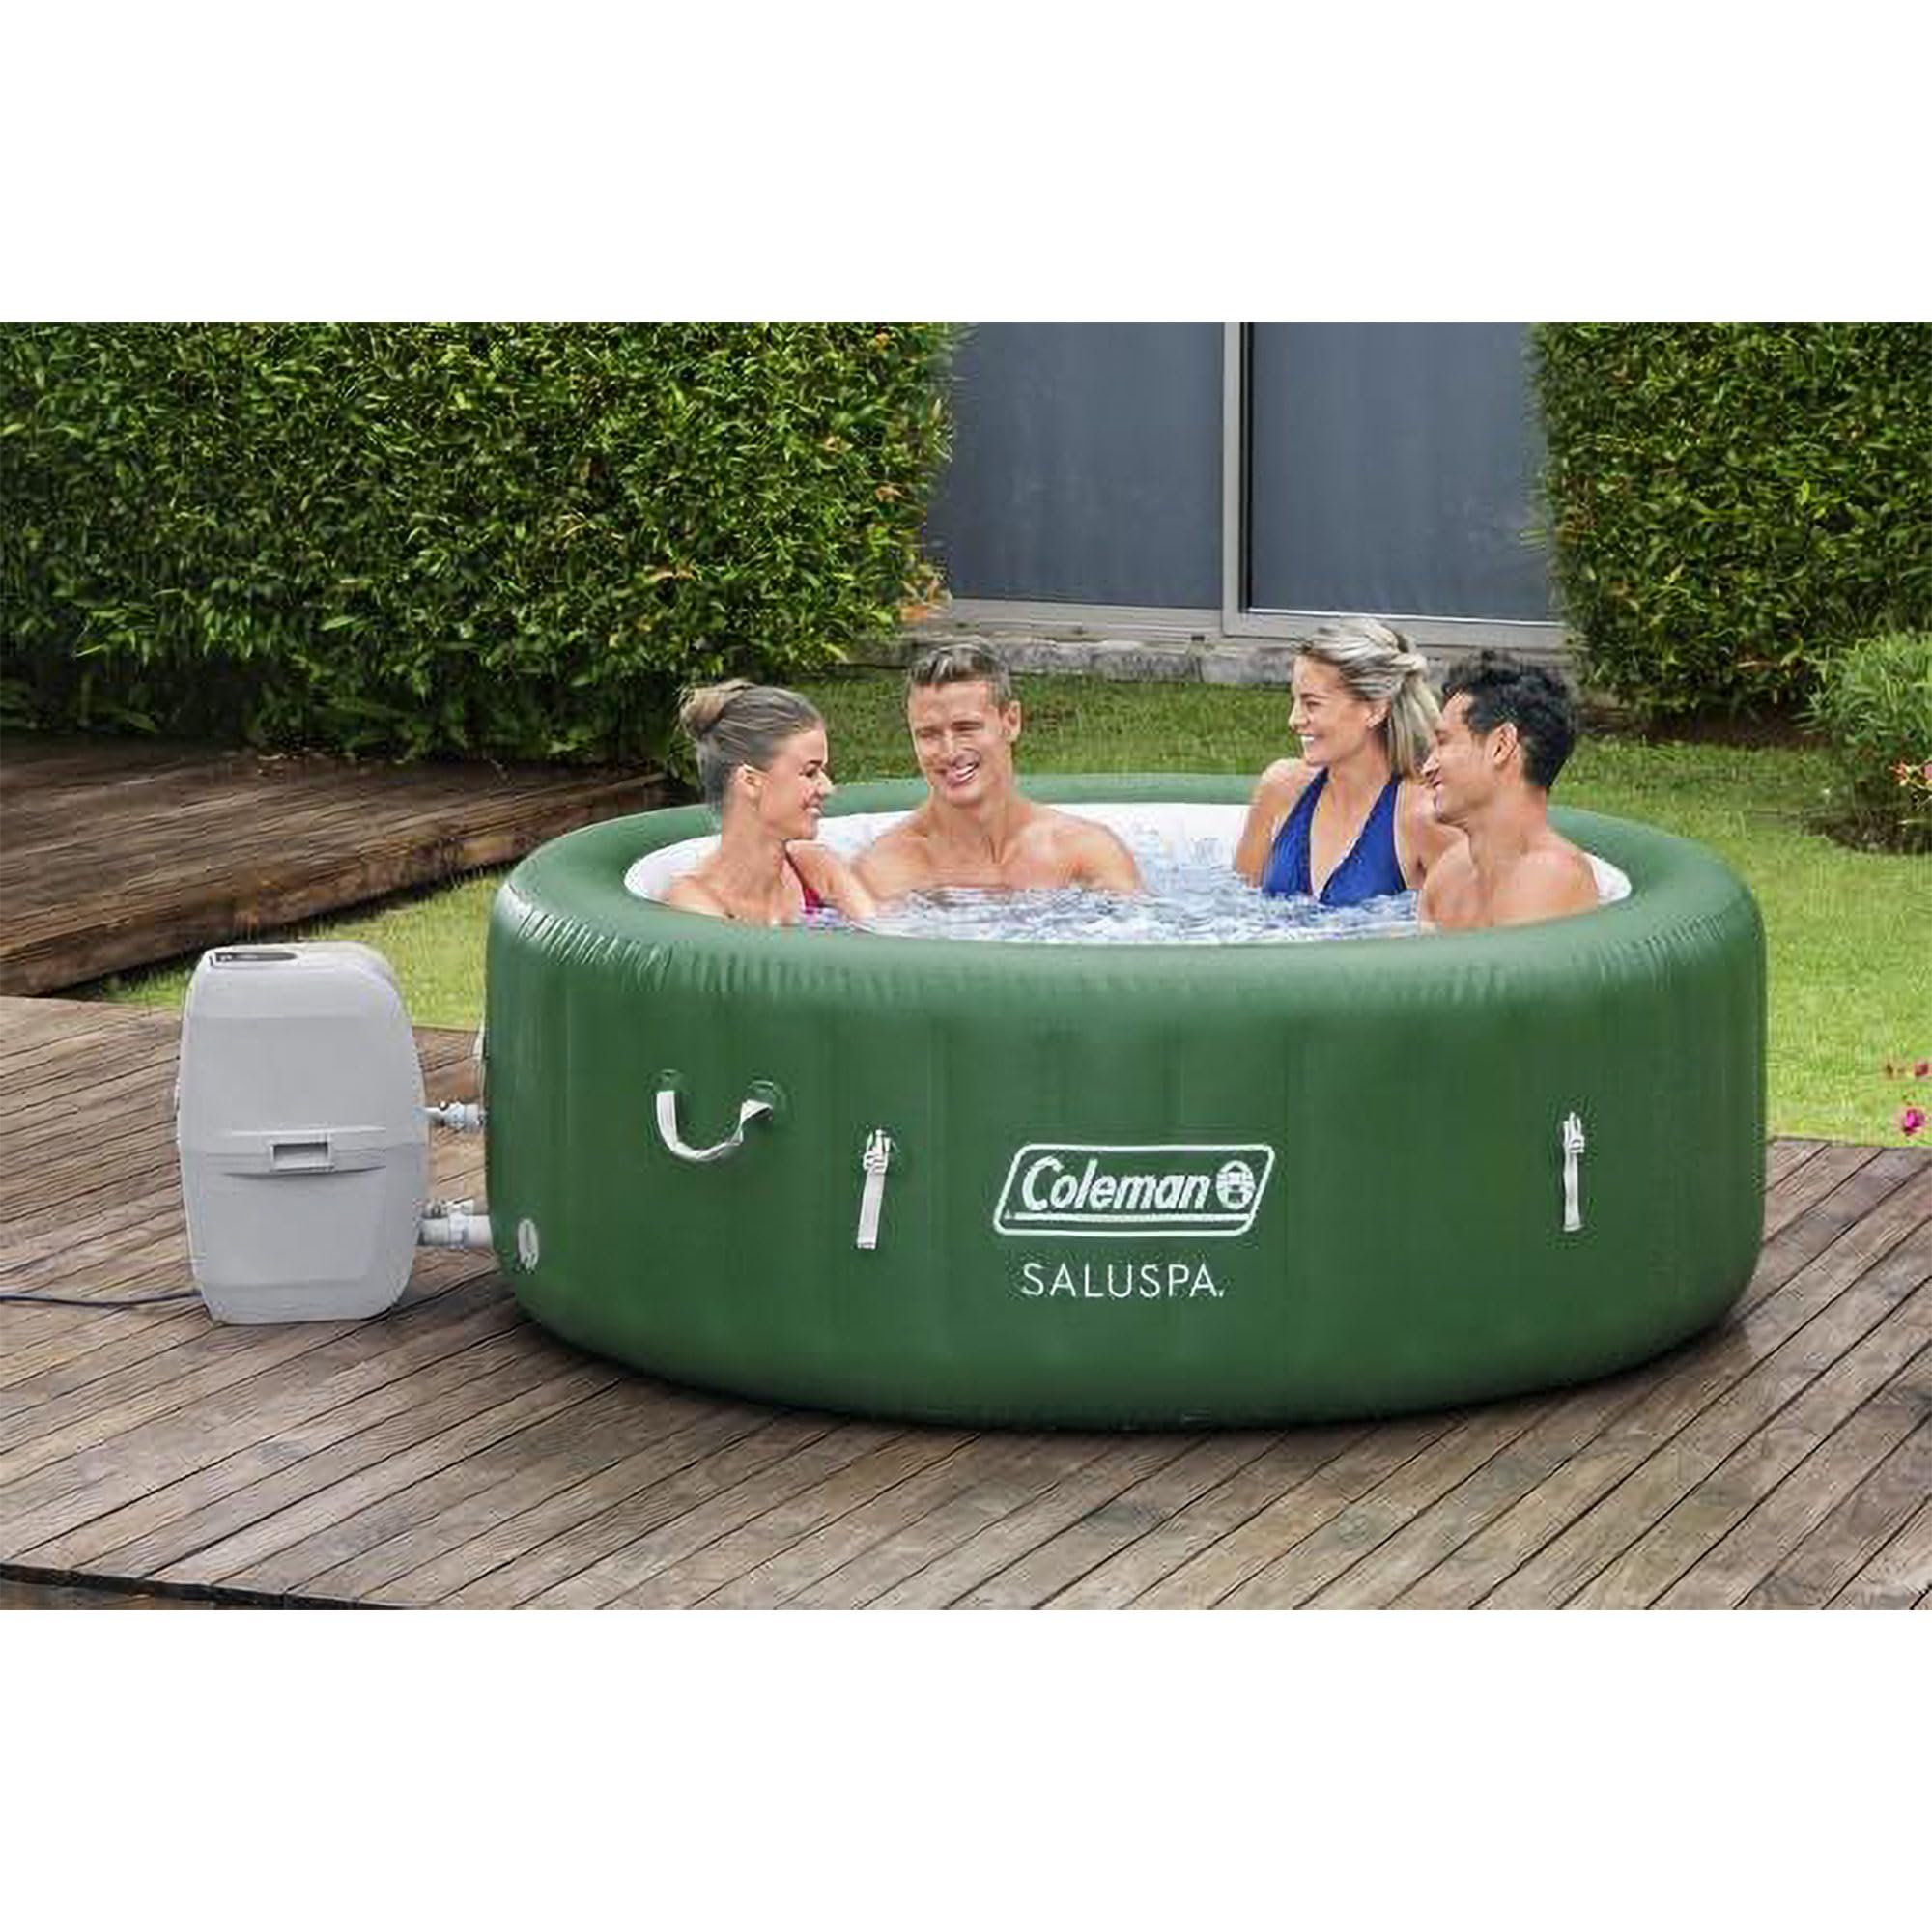 Coleman SaluSpa AirJet Inflatable Hot Tub with Bestway SaluSpa Underwater Non Slip Pool and Spa Seat (4 Pack) and Headrest Pillows (4 Pack)